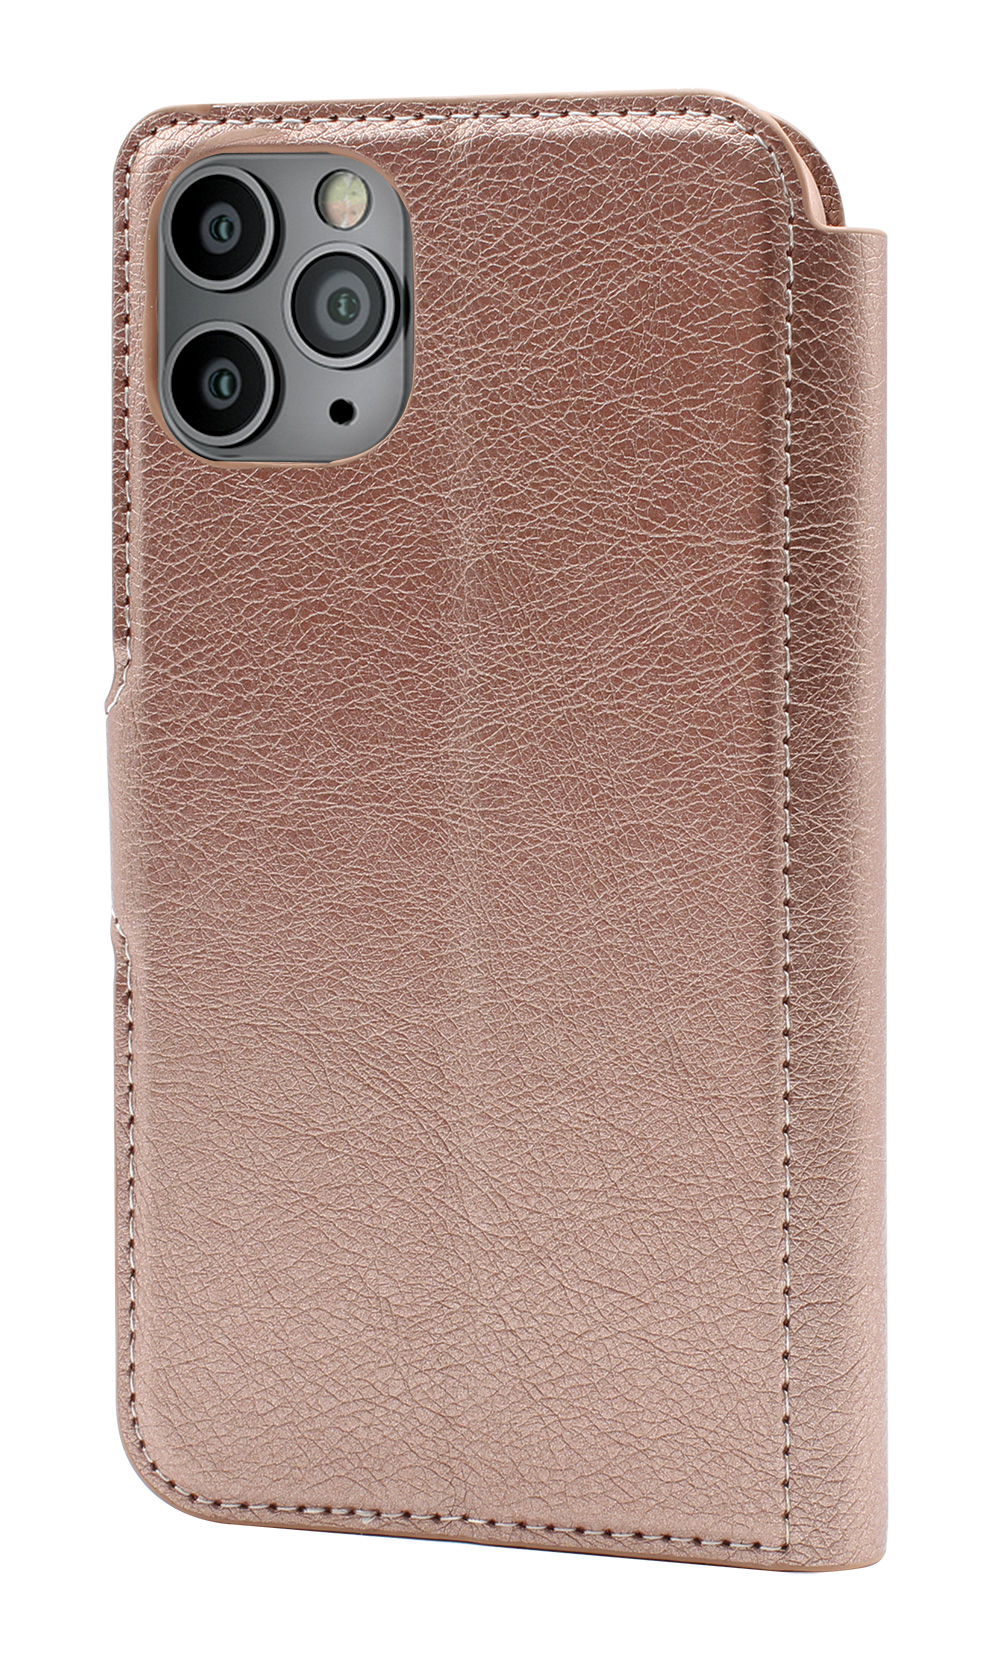 Rose Gold slim wallet folio case protector for iPhone 12 Pro Max cell phones